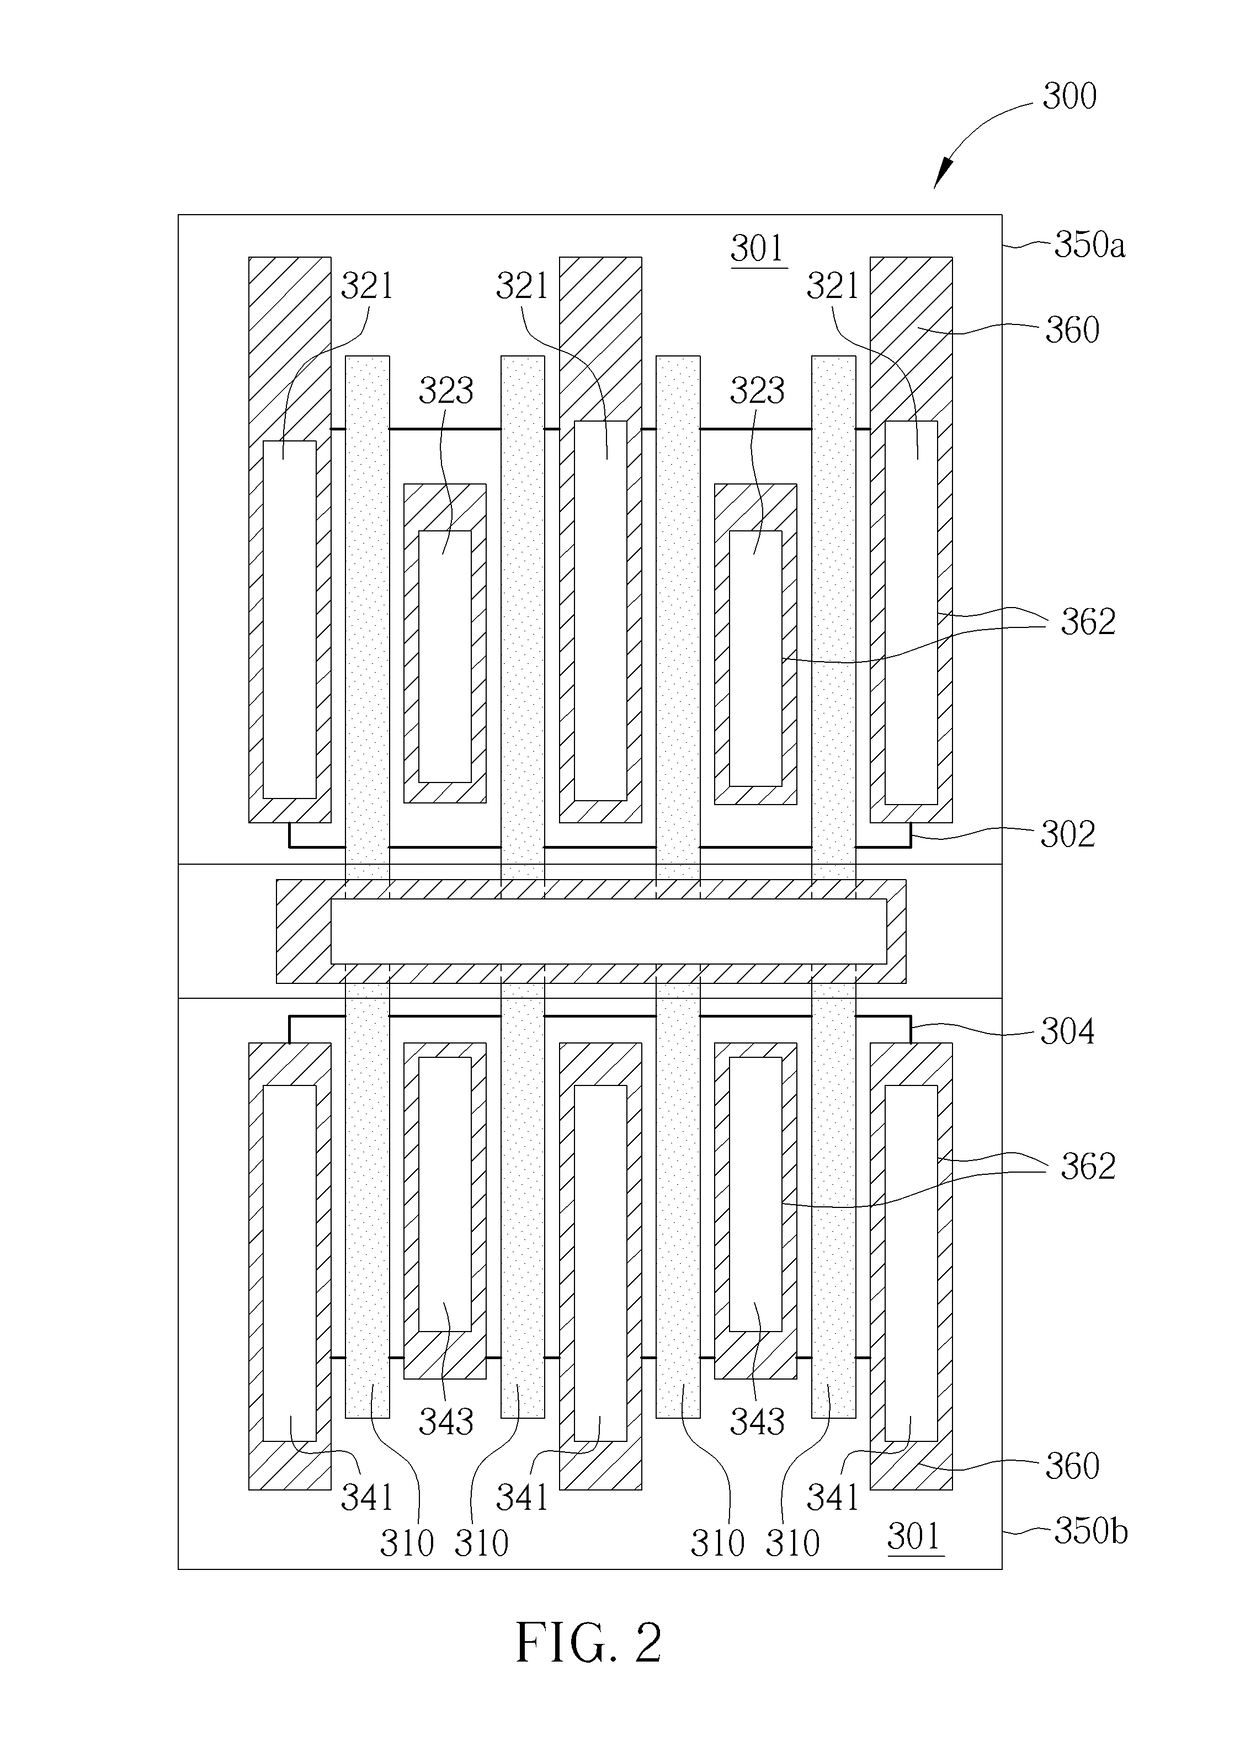 Layout of semiconductor device